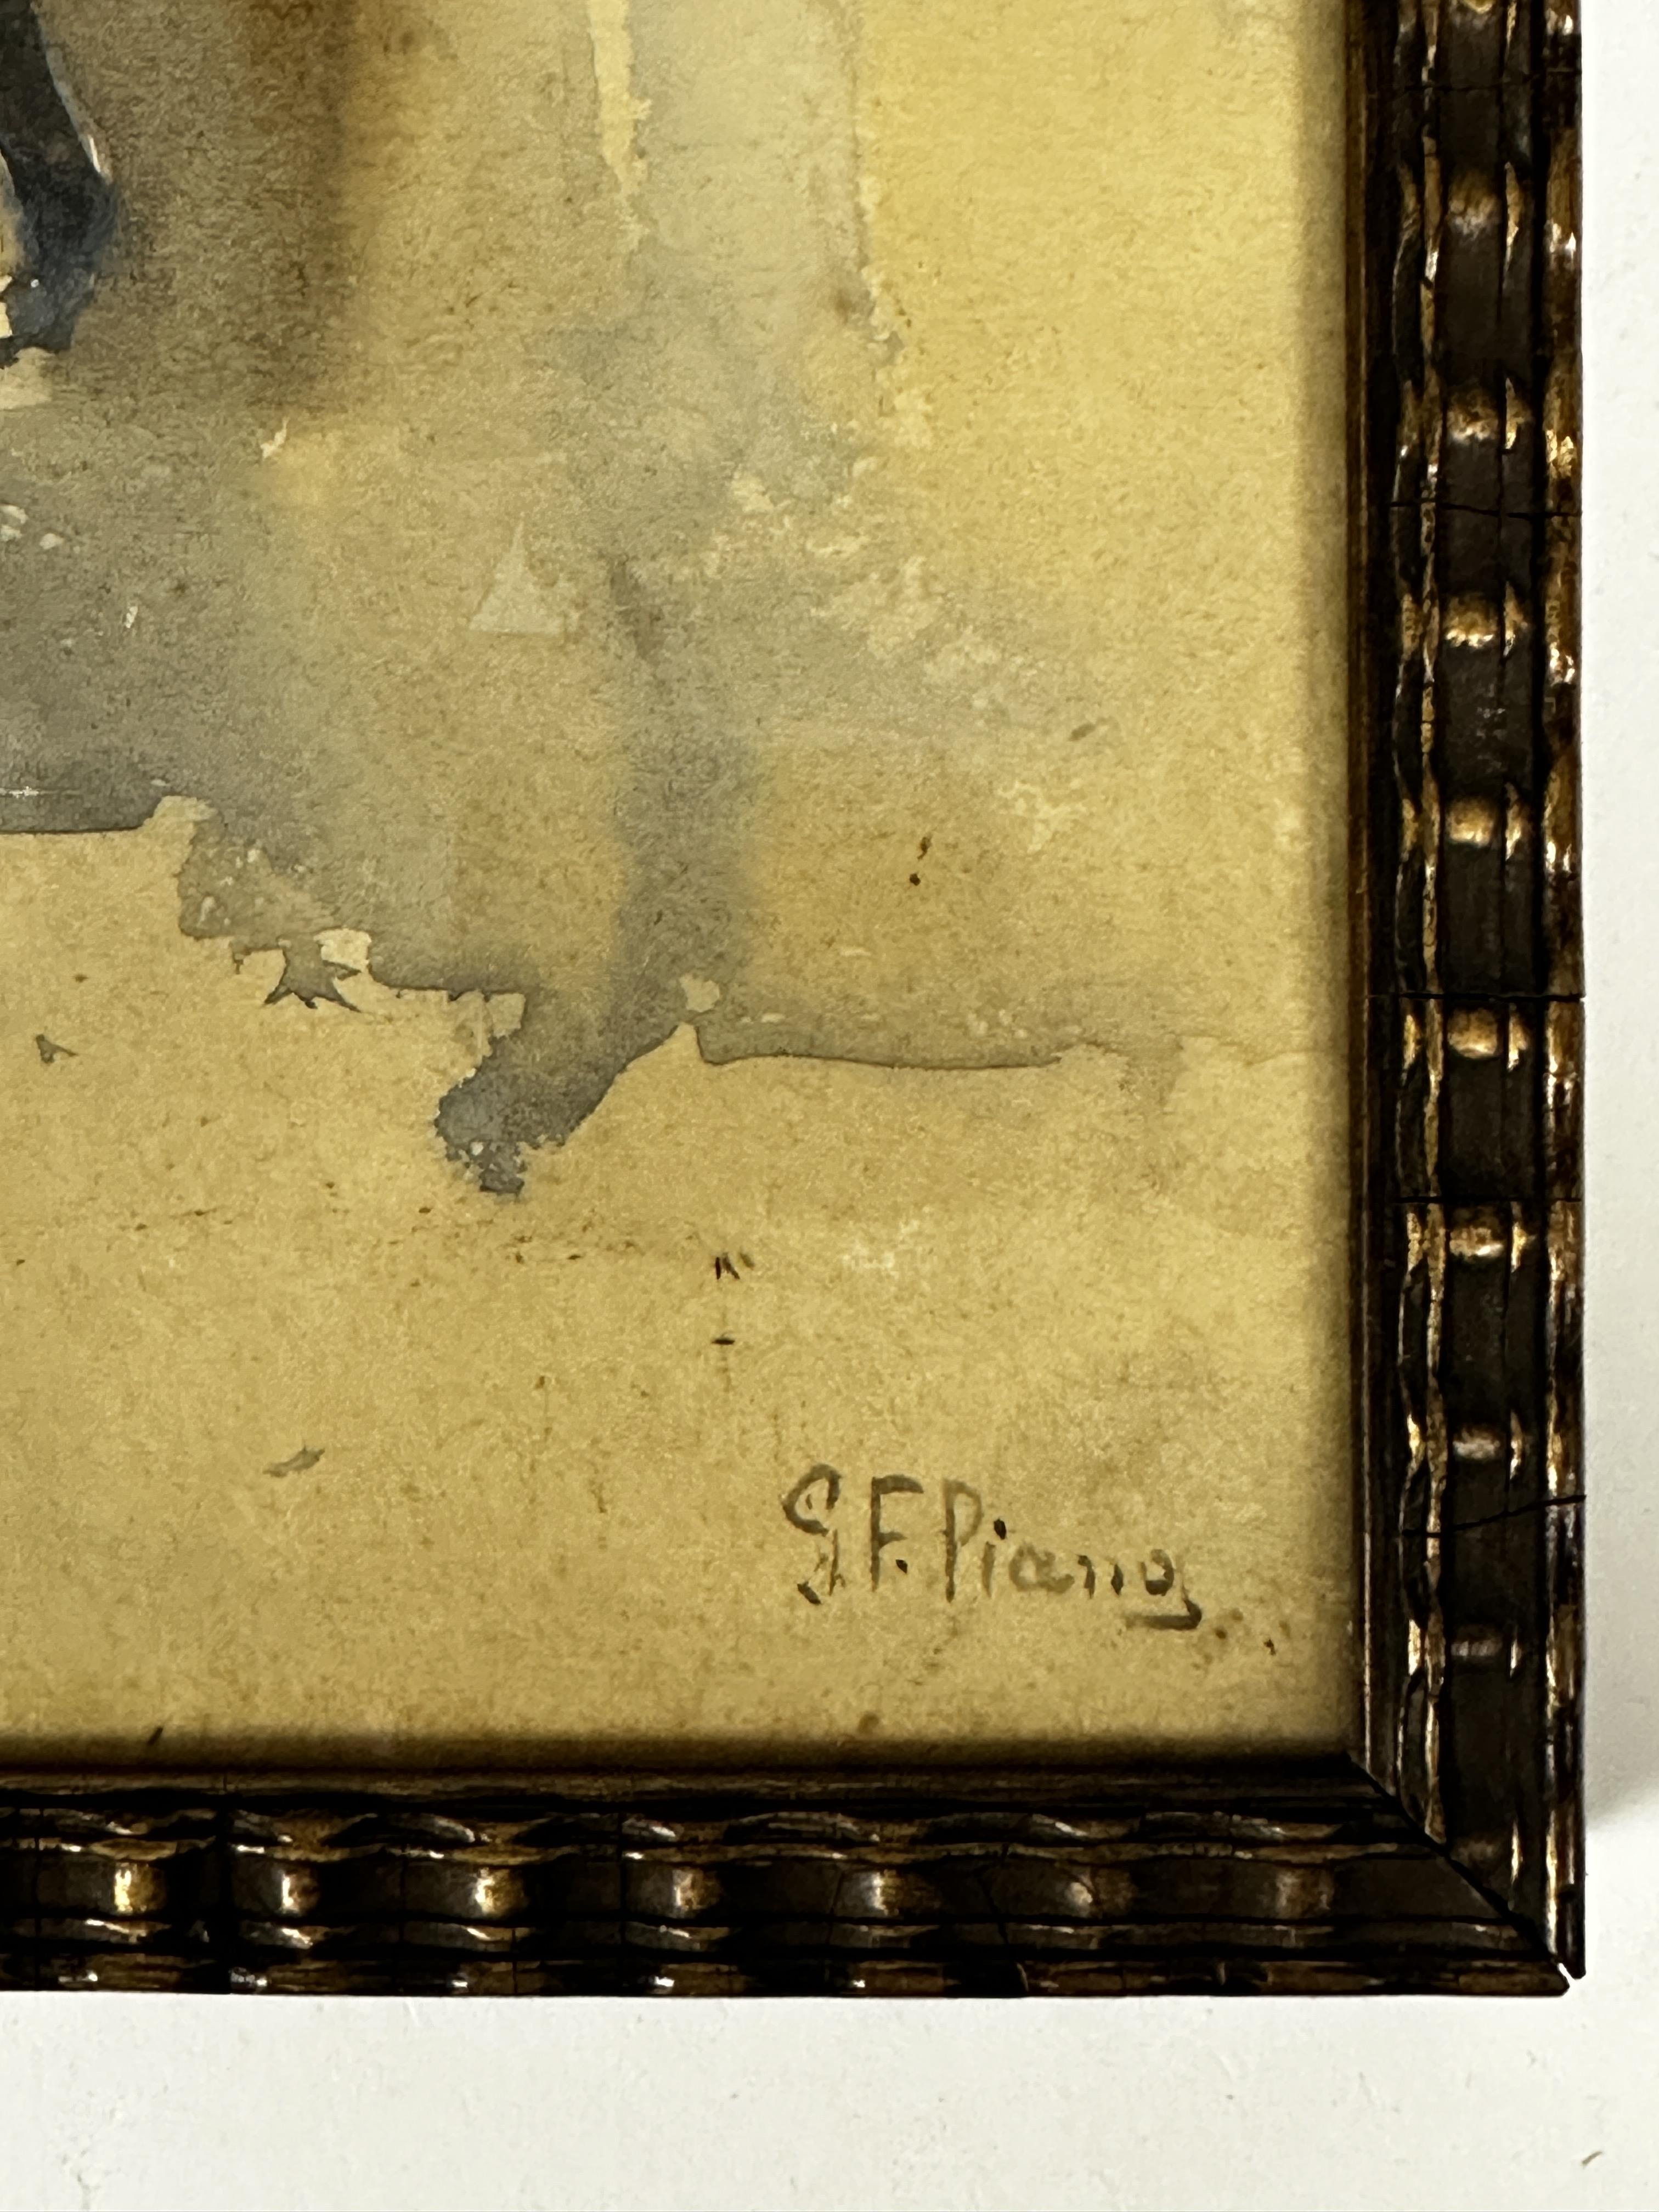 G F Piang.gf.piano, Figures Outside Doorway, watercolour, signed bottom right, gilt glazed frame, ( - Image 2 of 2